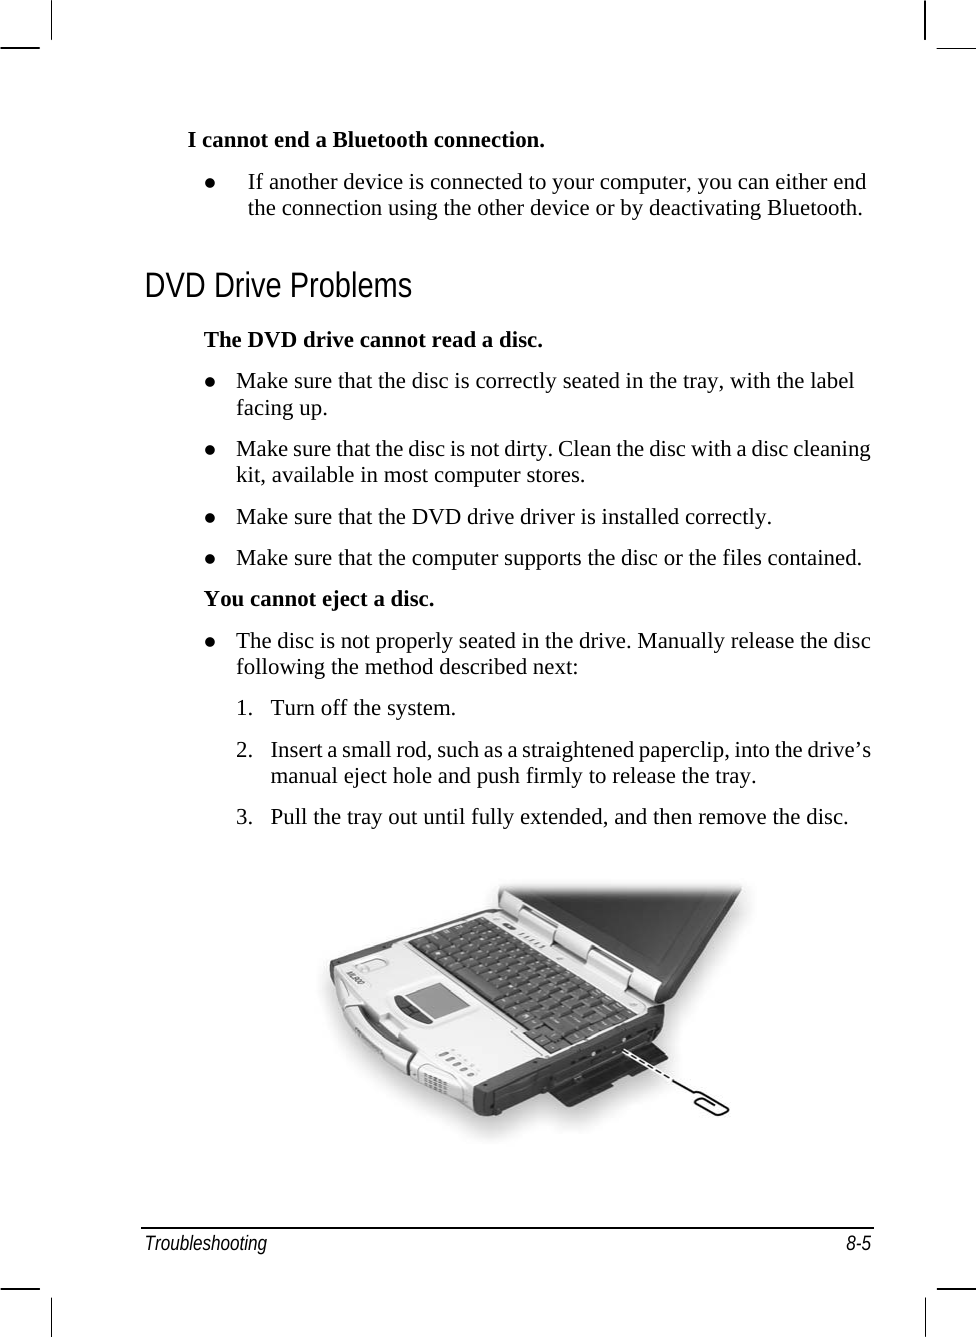  I cannot end a Bluetooth connection. z If another device is connected to your computer, you can either end the connection using the other device or by deactivating Bluetooth. DVD Drive Problems The DVD drive cannot read a disc. z Make sure that the disc is correctly seated in the tray, with the label facing up. z Make sure that the disc is not dirty. Clean the disc with a disc cleaning kit, available in most computer stores. z Make sure that the DVD drive driver is installed correctly. z Make sure that the computer supports the disc or the files contained. You cannot eject a disc. z The disc is not properly seated in the drive. Manually release the disc following the method described next: 1. Turn off the system. 2. Insert a small rod, such as a straightened paperclip, into the drive’s manual eject hole and push firmly to release the tray. 3. Pull the tray out until fully extended, and then remove the disc.  Troubleshooting 8-5 